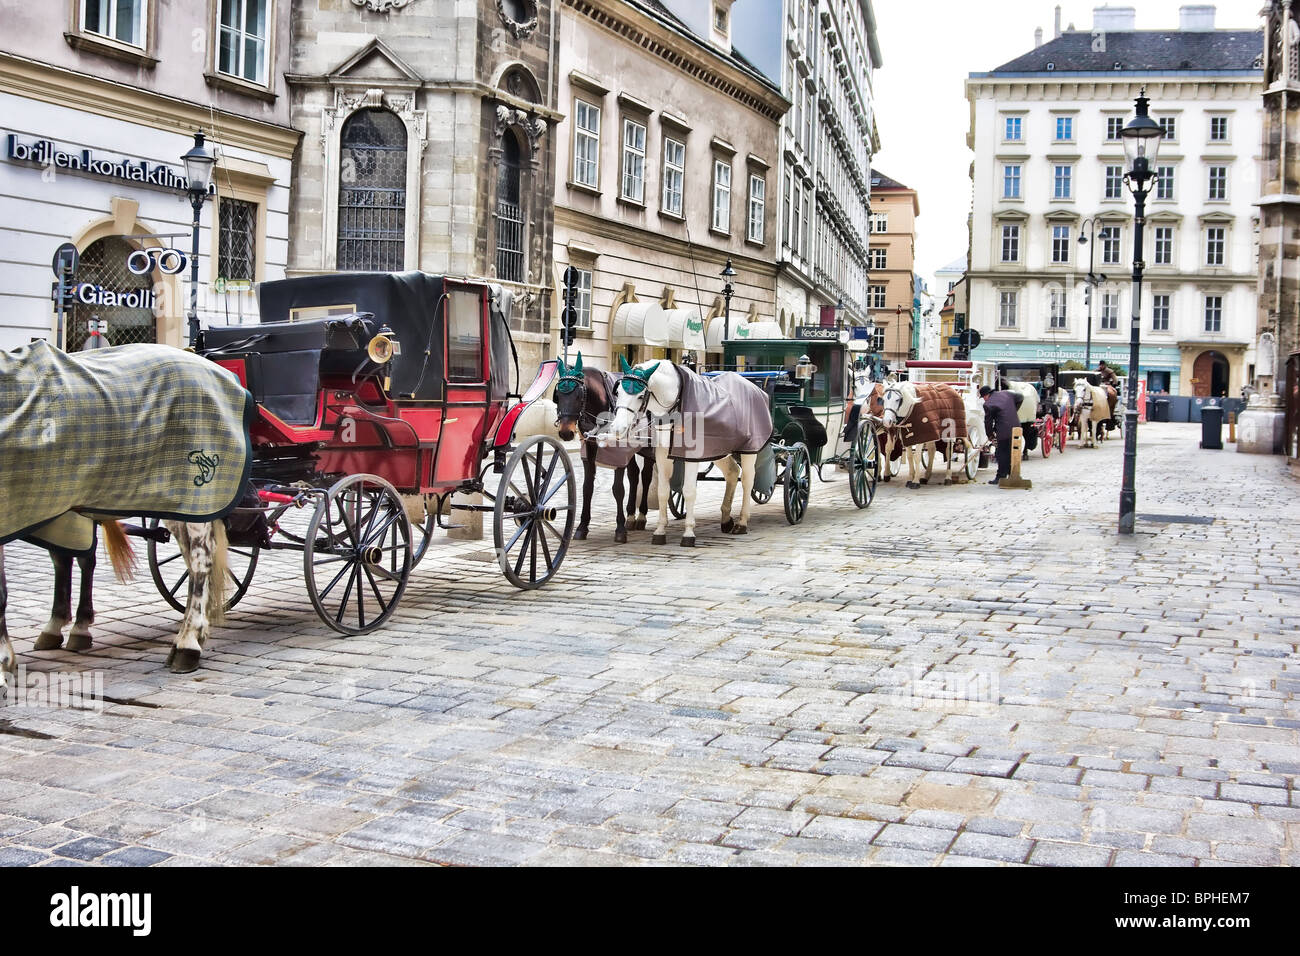 Horses and wagons waiting for tourists in downtown Vienna, Austria. Stock Photo